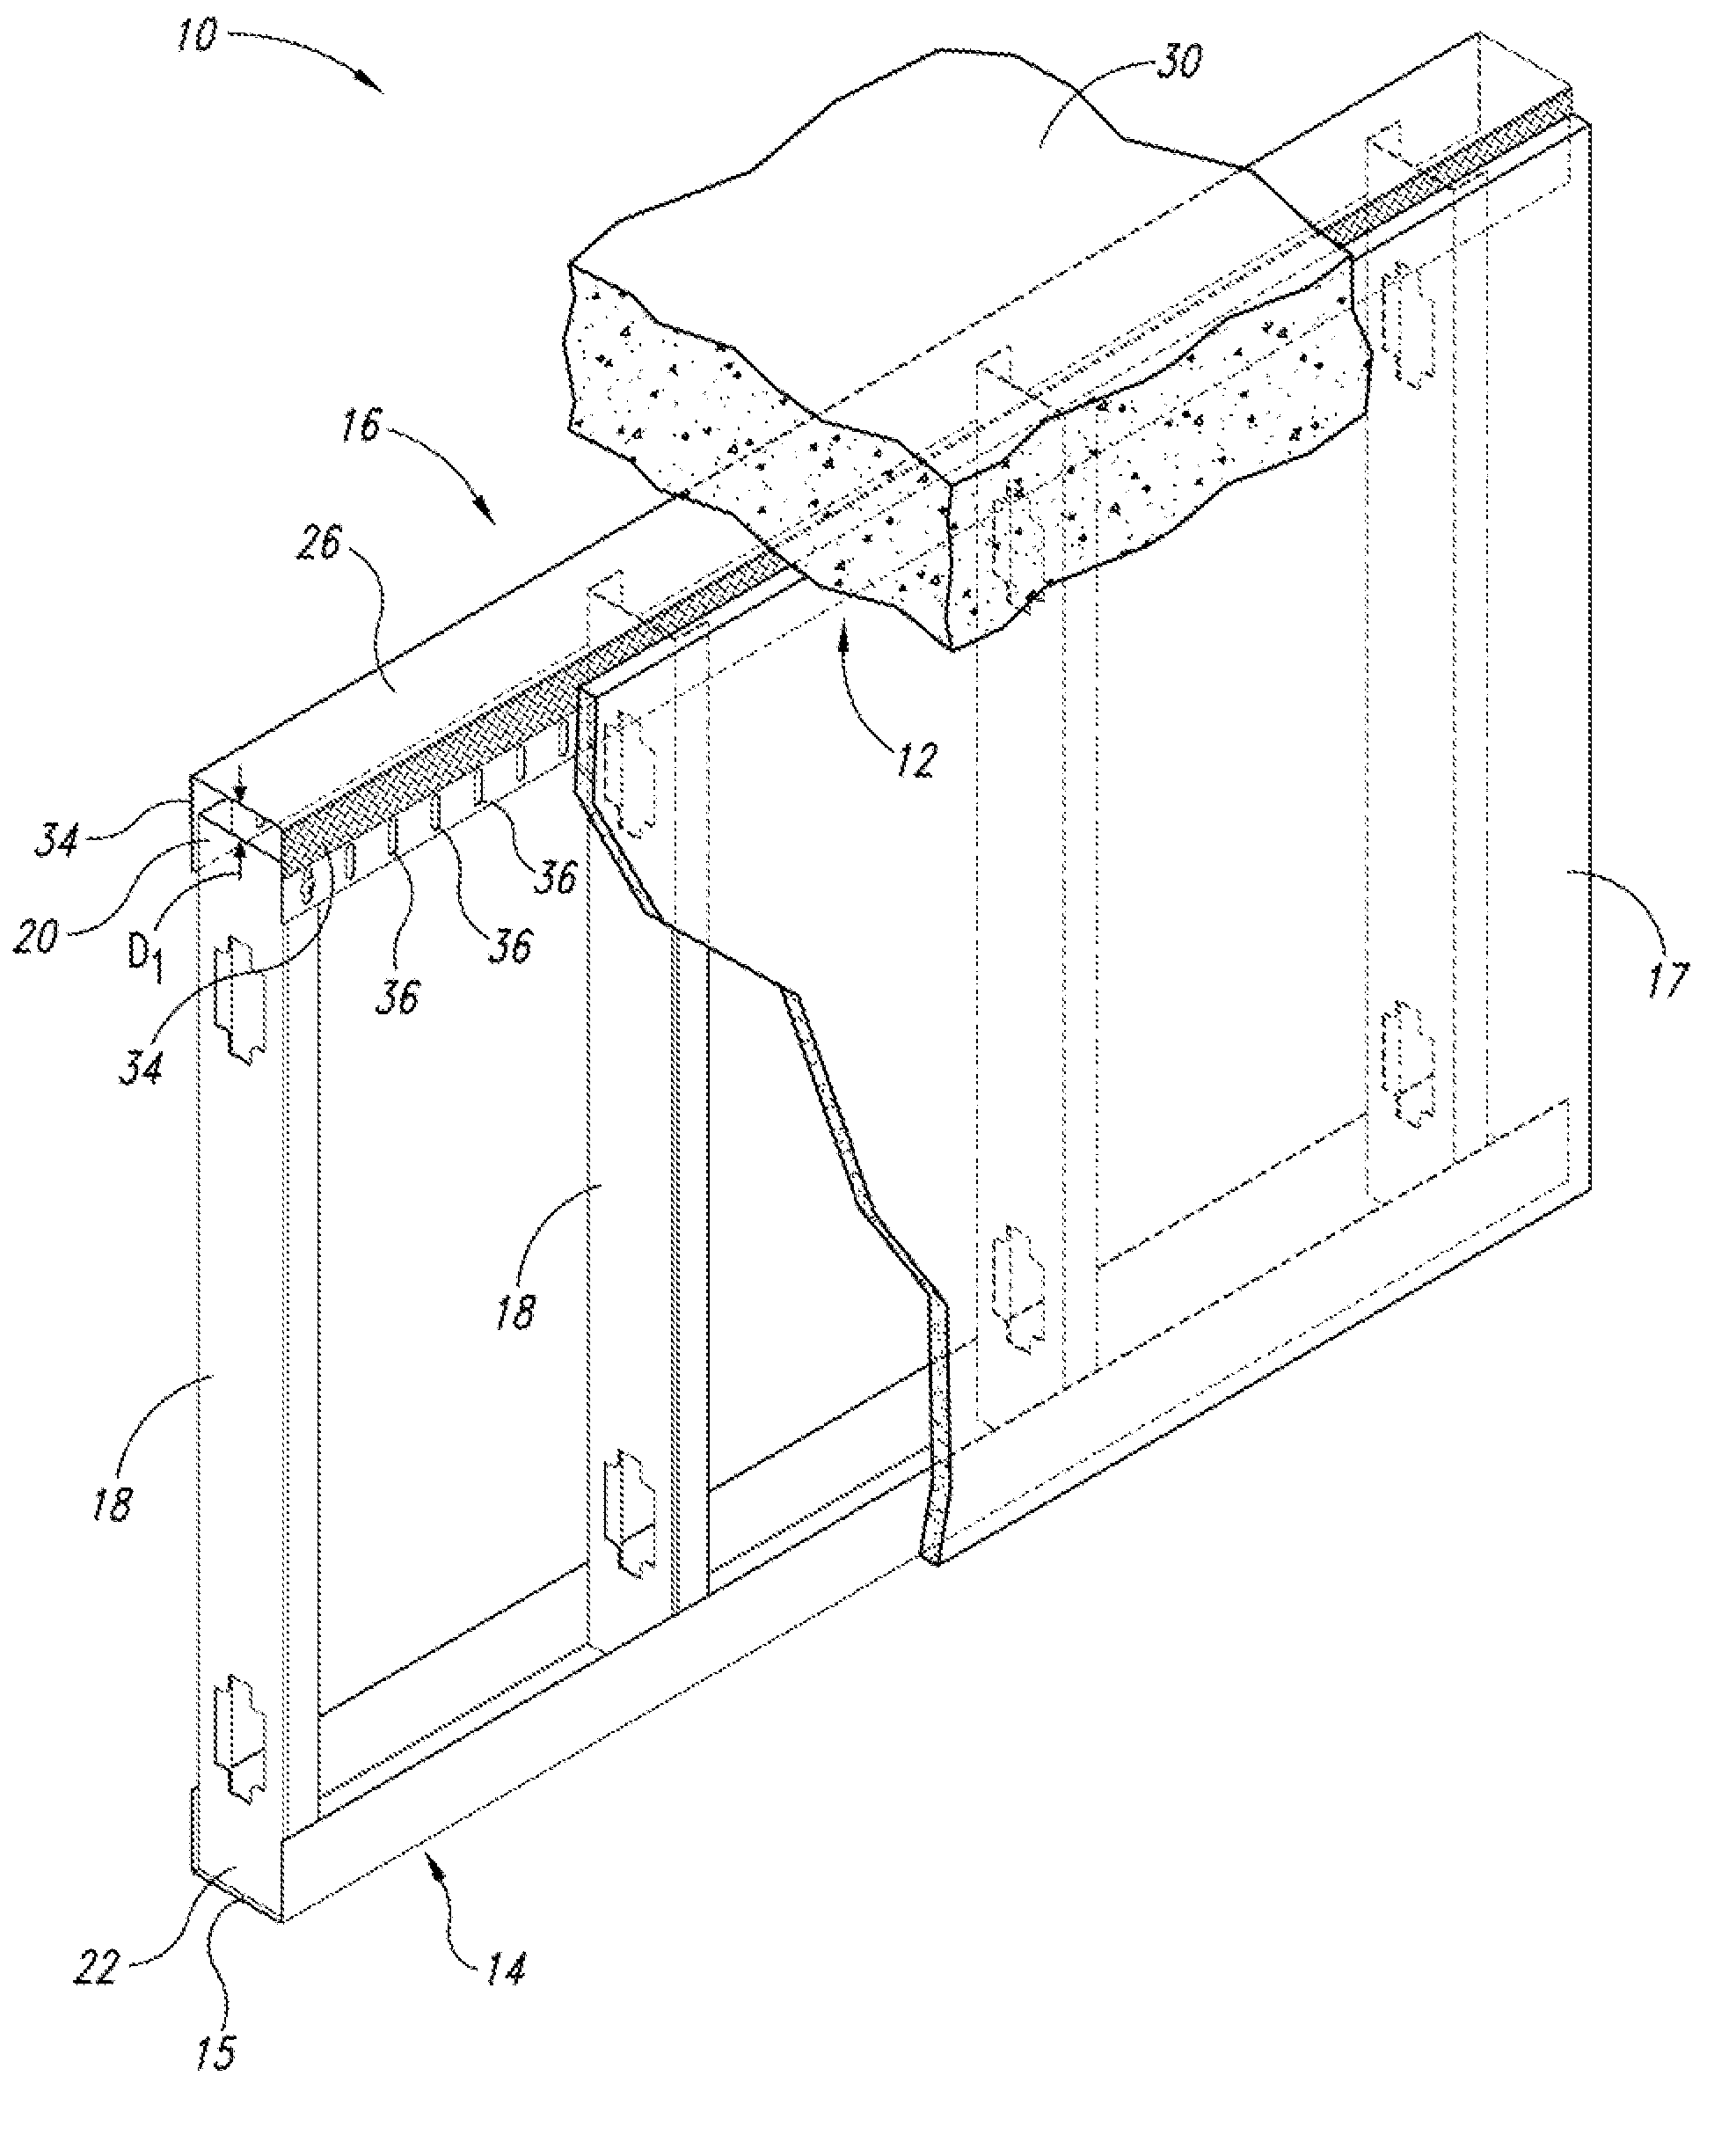 Head-of-wall fireblock systems and related wall assemblies